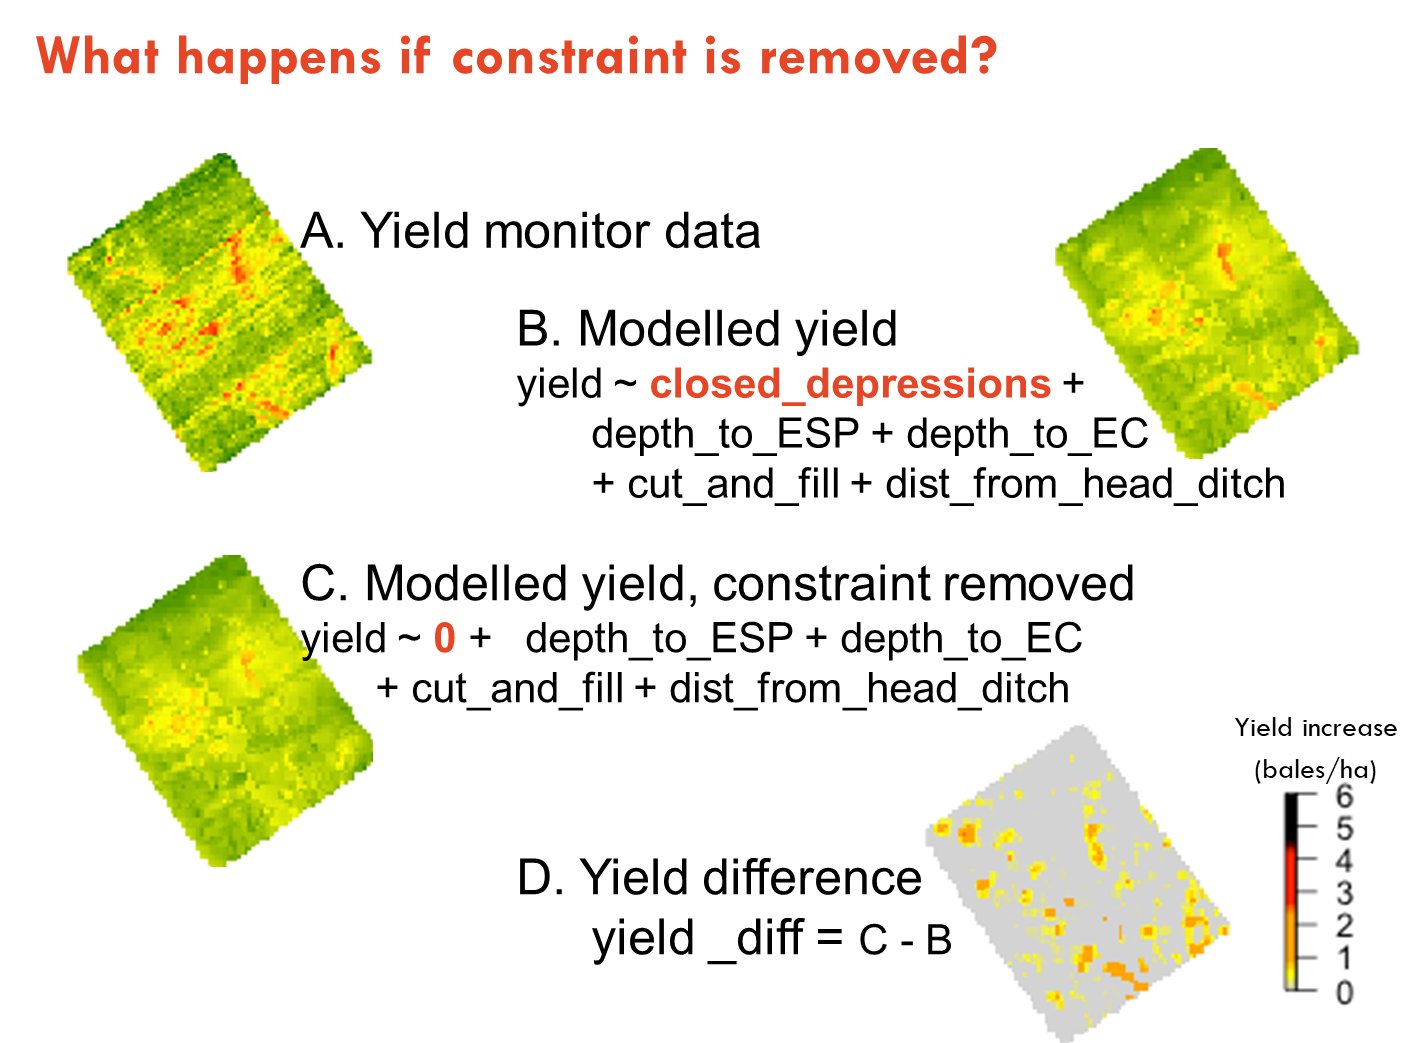 This figure is a conceptual model of process to quantify the potential yield benefit of removing yield constraint of closed depressions.